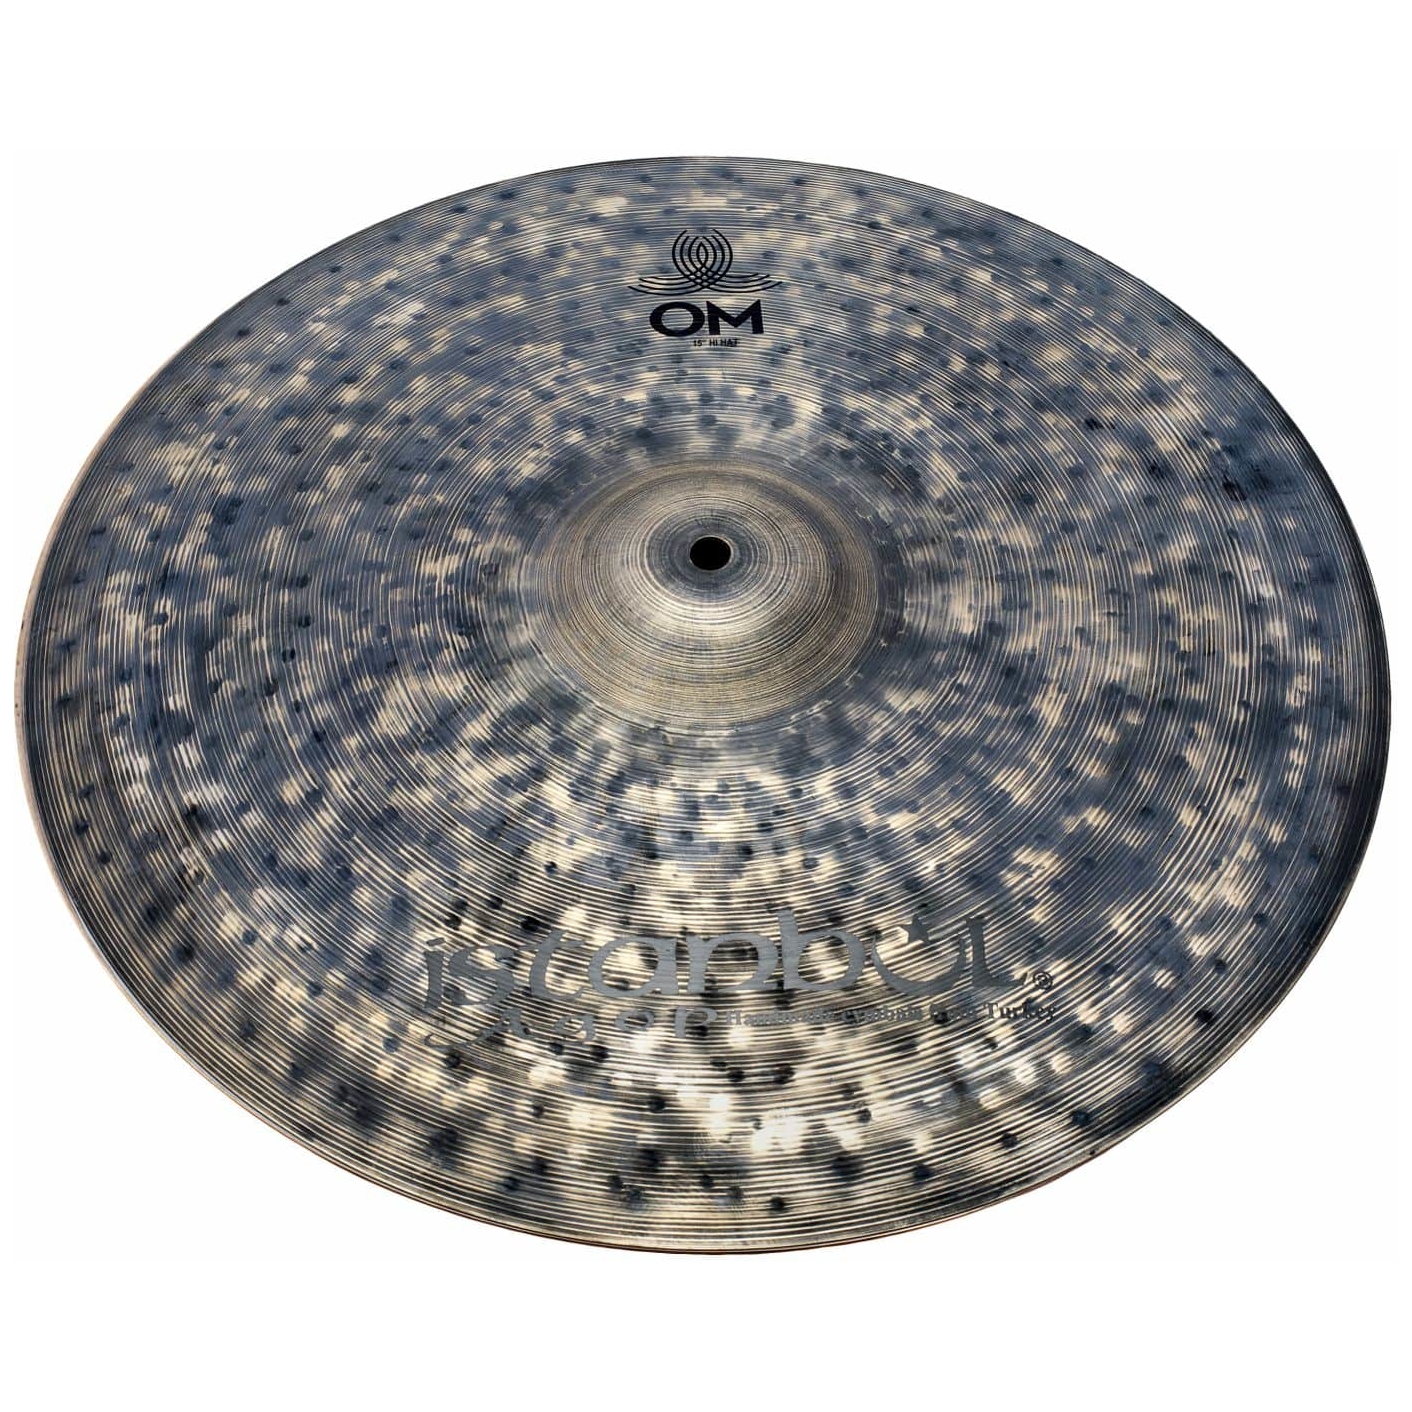 Agop Istanbul Signature Series - Cindy Blackman OM Hats - 15 Zoll